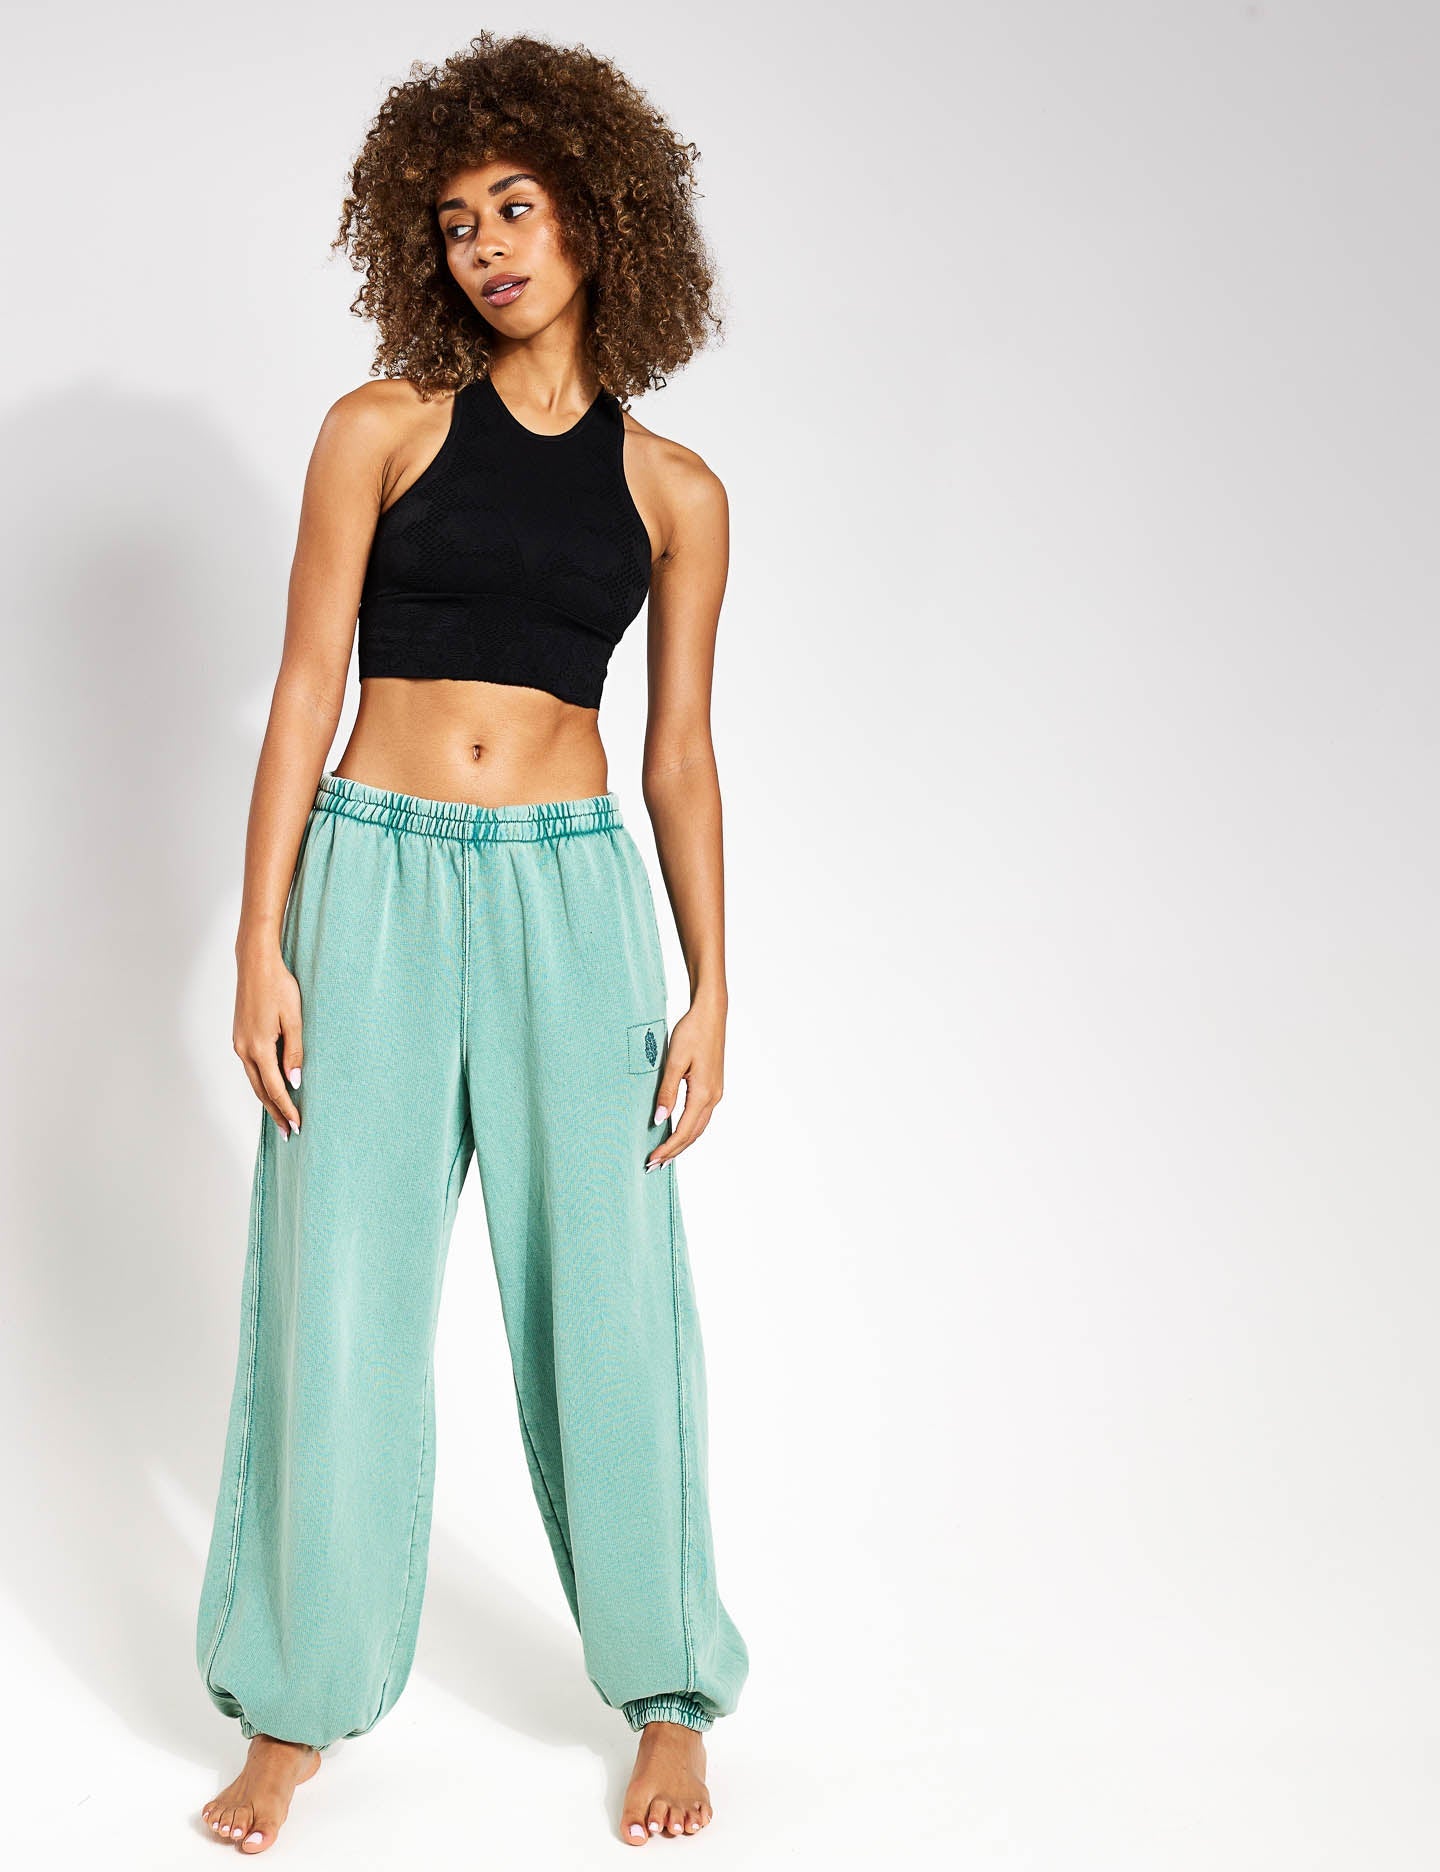 FREE PEOPLE MOVEMENT ALL STAR SOLID PANTS - EMERALD AURA 6515 – Work It Out